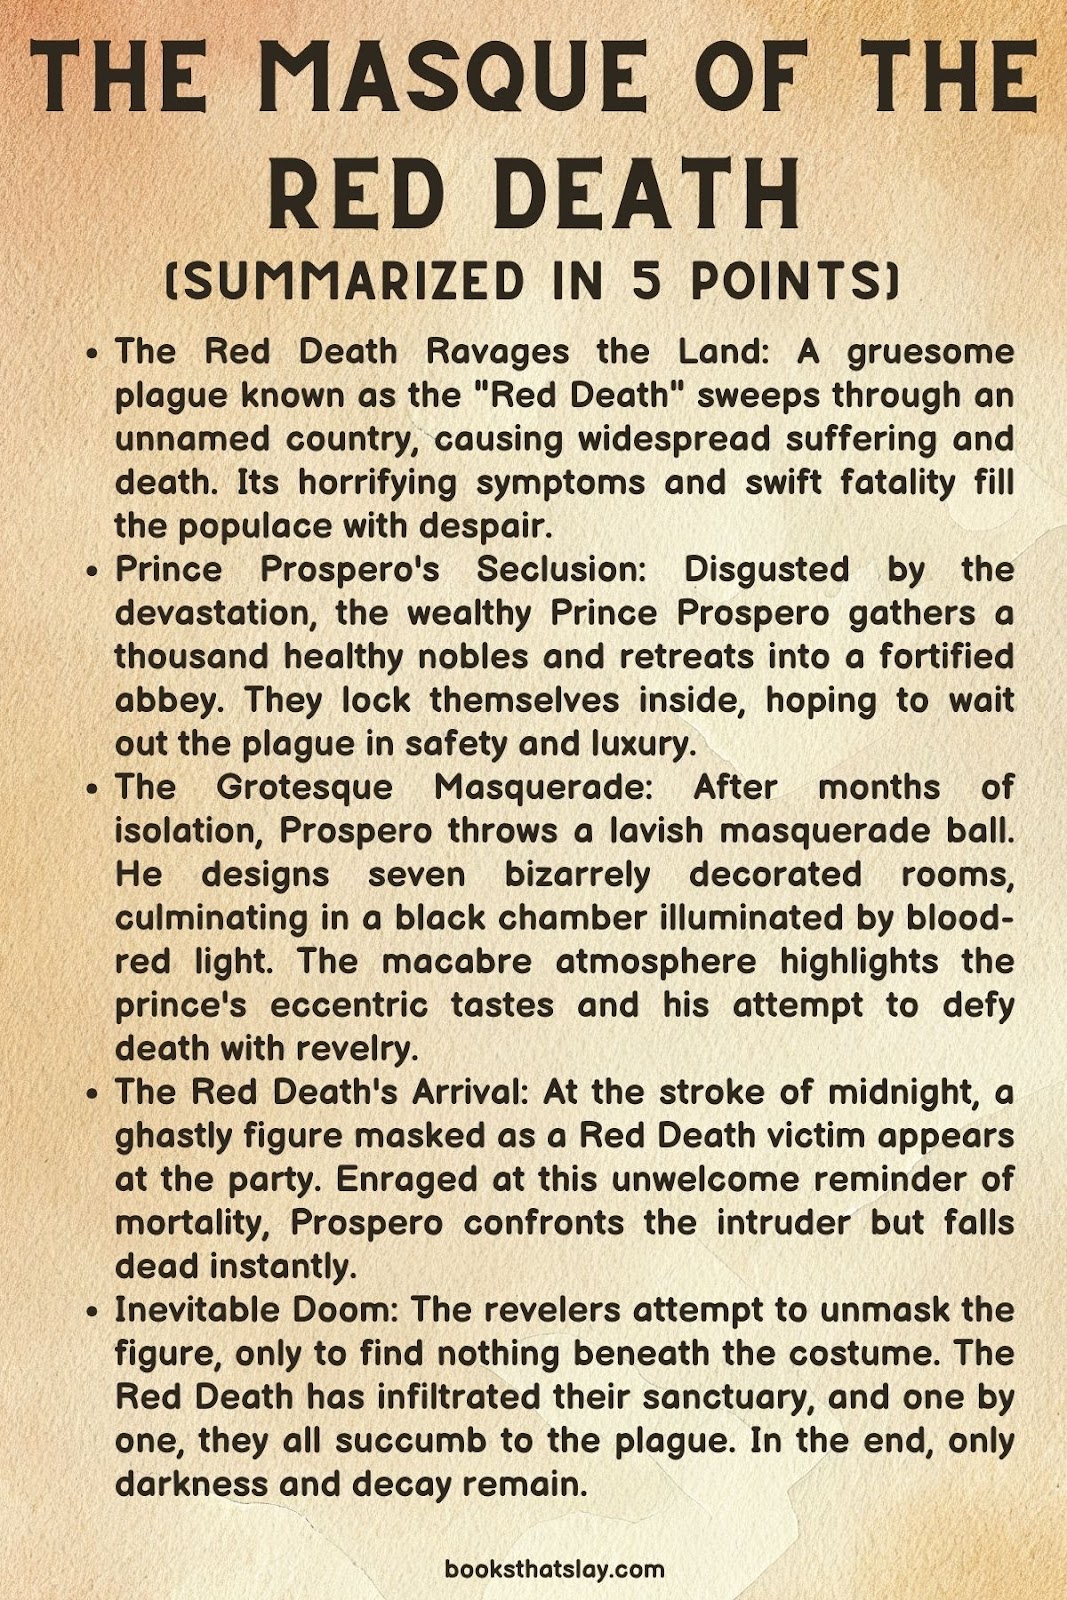 The Masque of the Red Death Summary